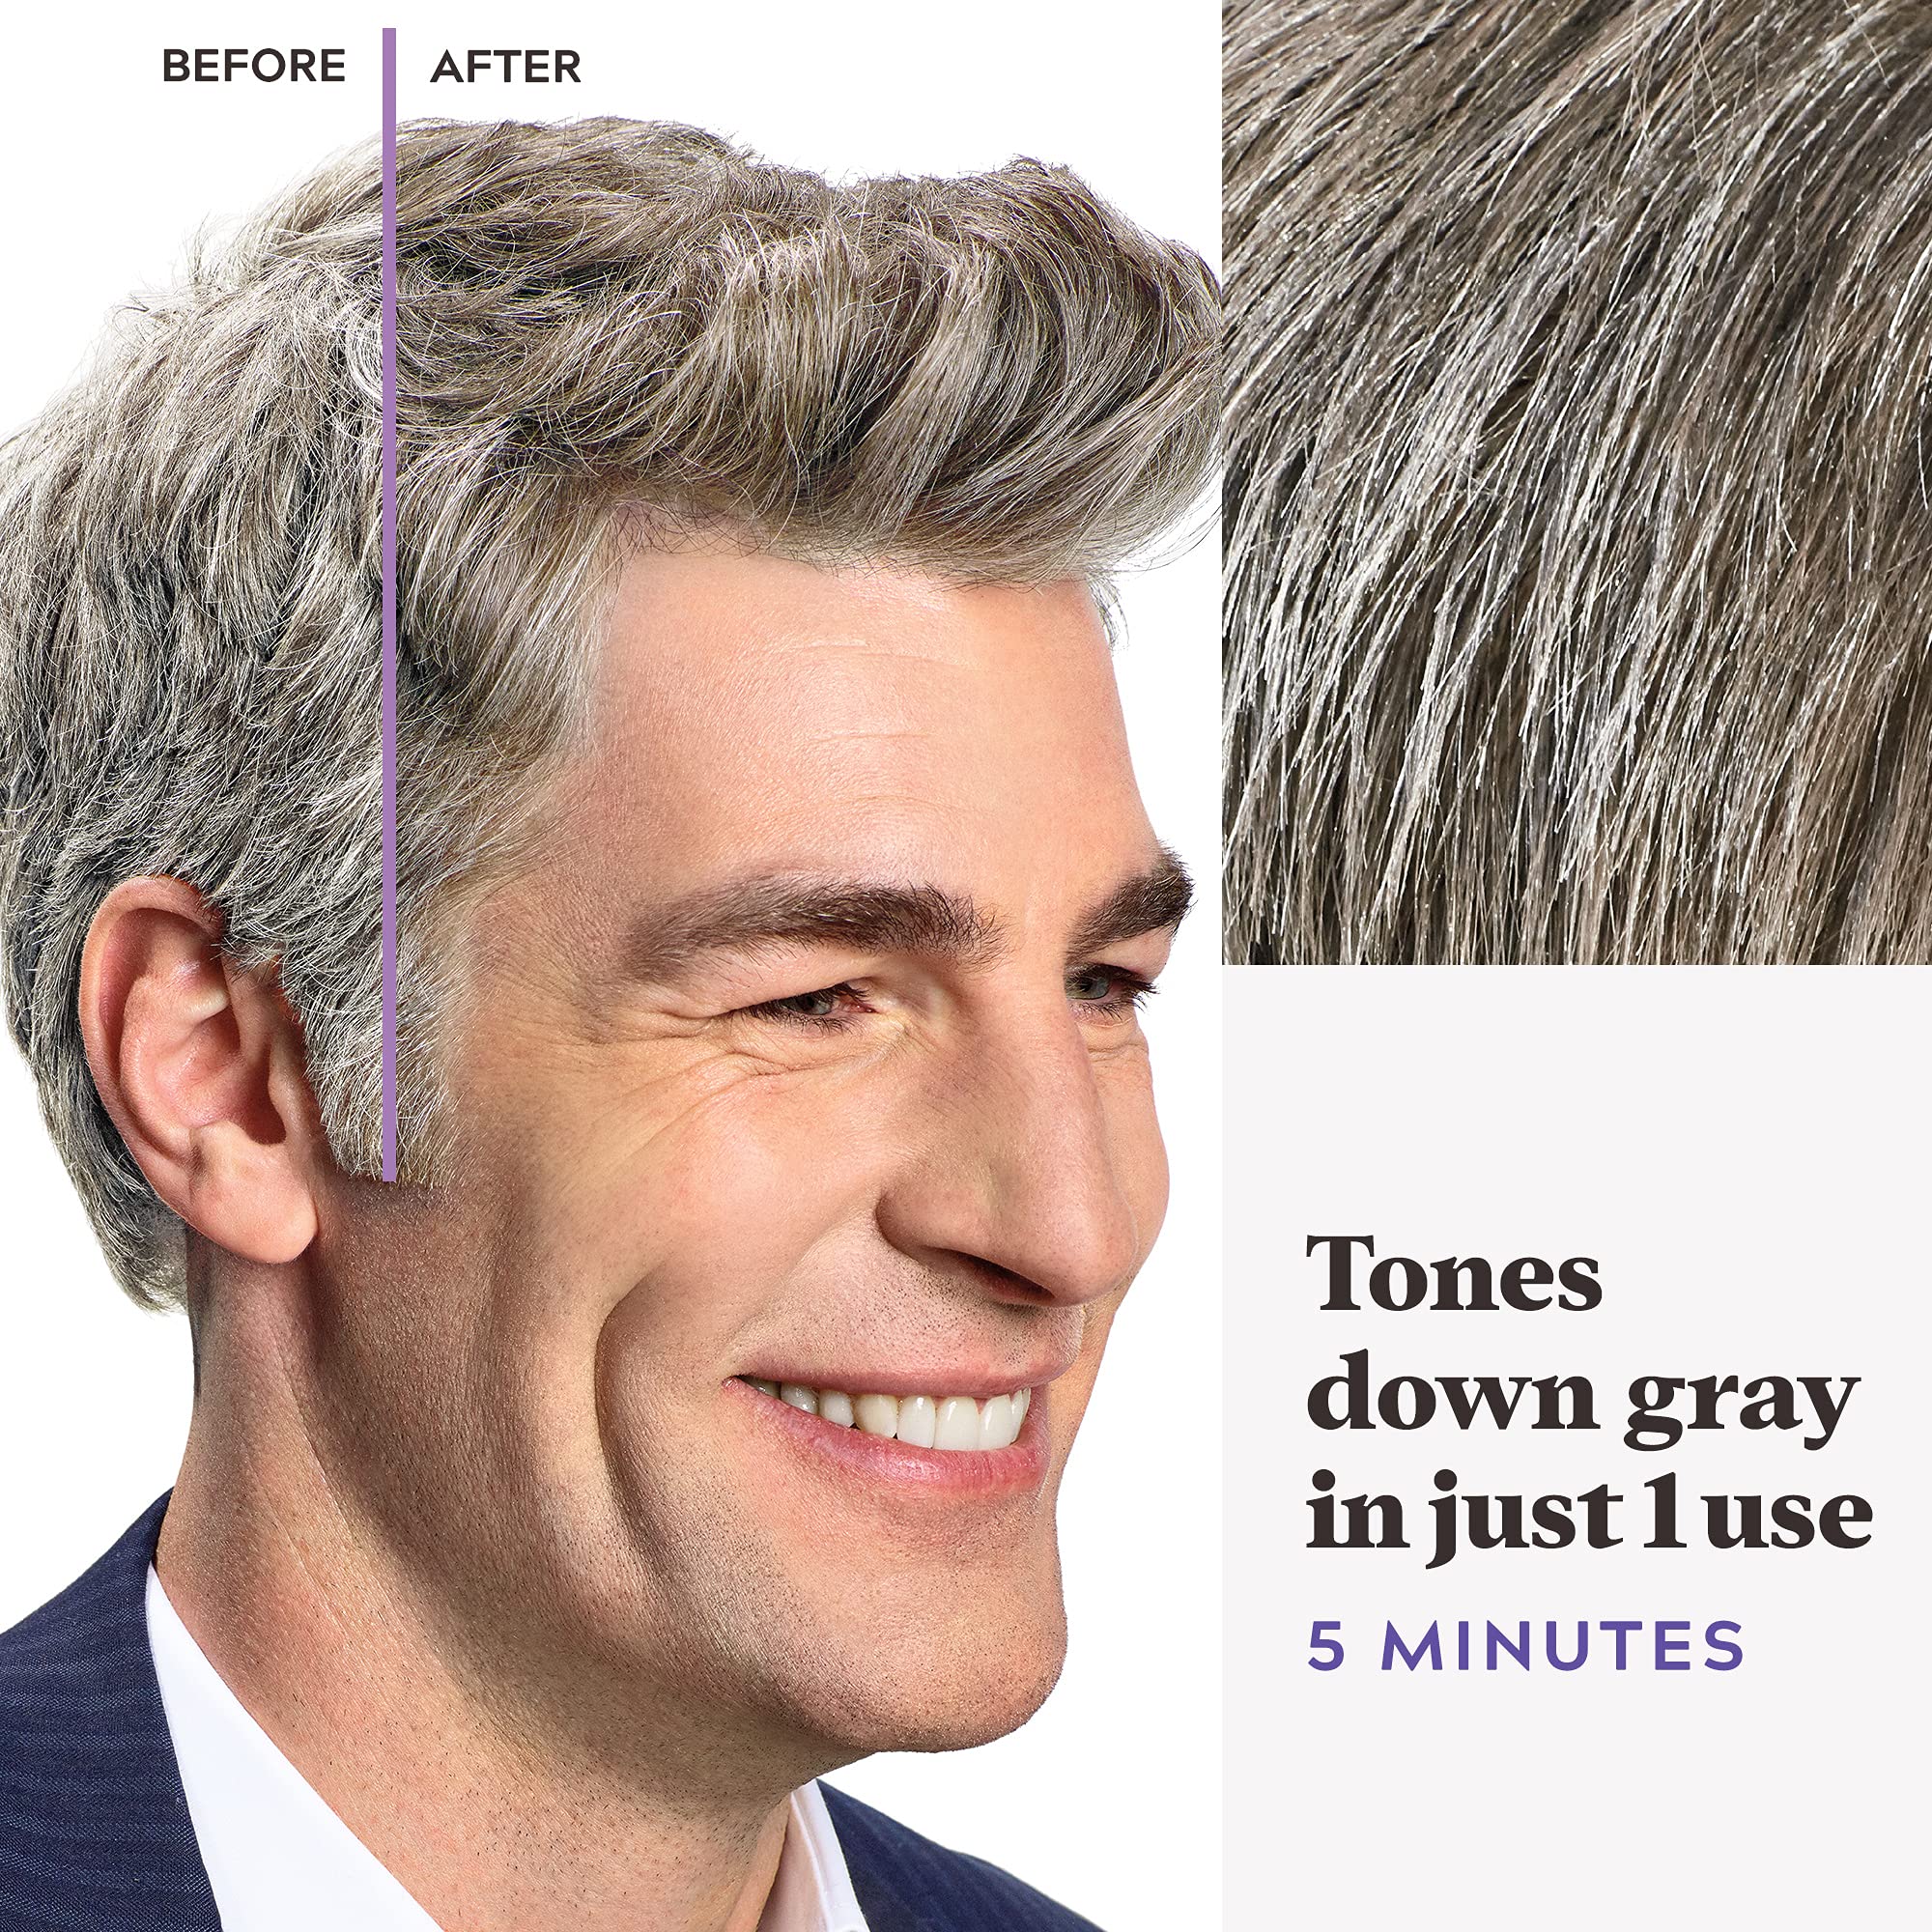 Just For Men Touch of Gray, Mens Hair Color Kit with Comb Applicator for Easy Application, Great for a Salt and Pepper Look - Light Brown, T-25, Pack of 1